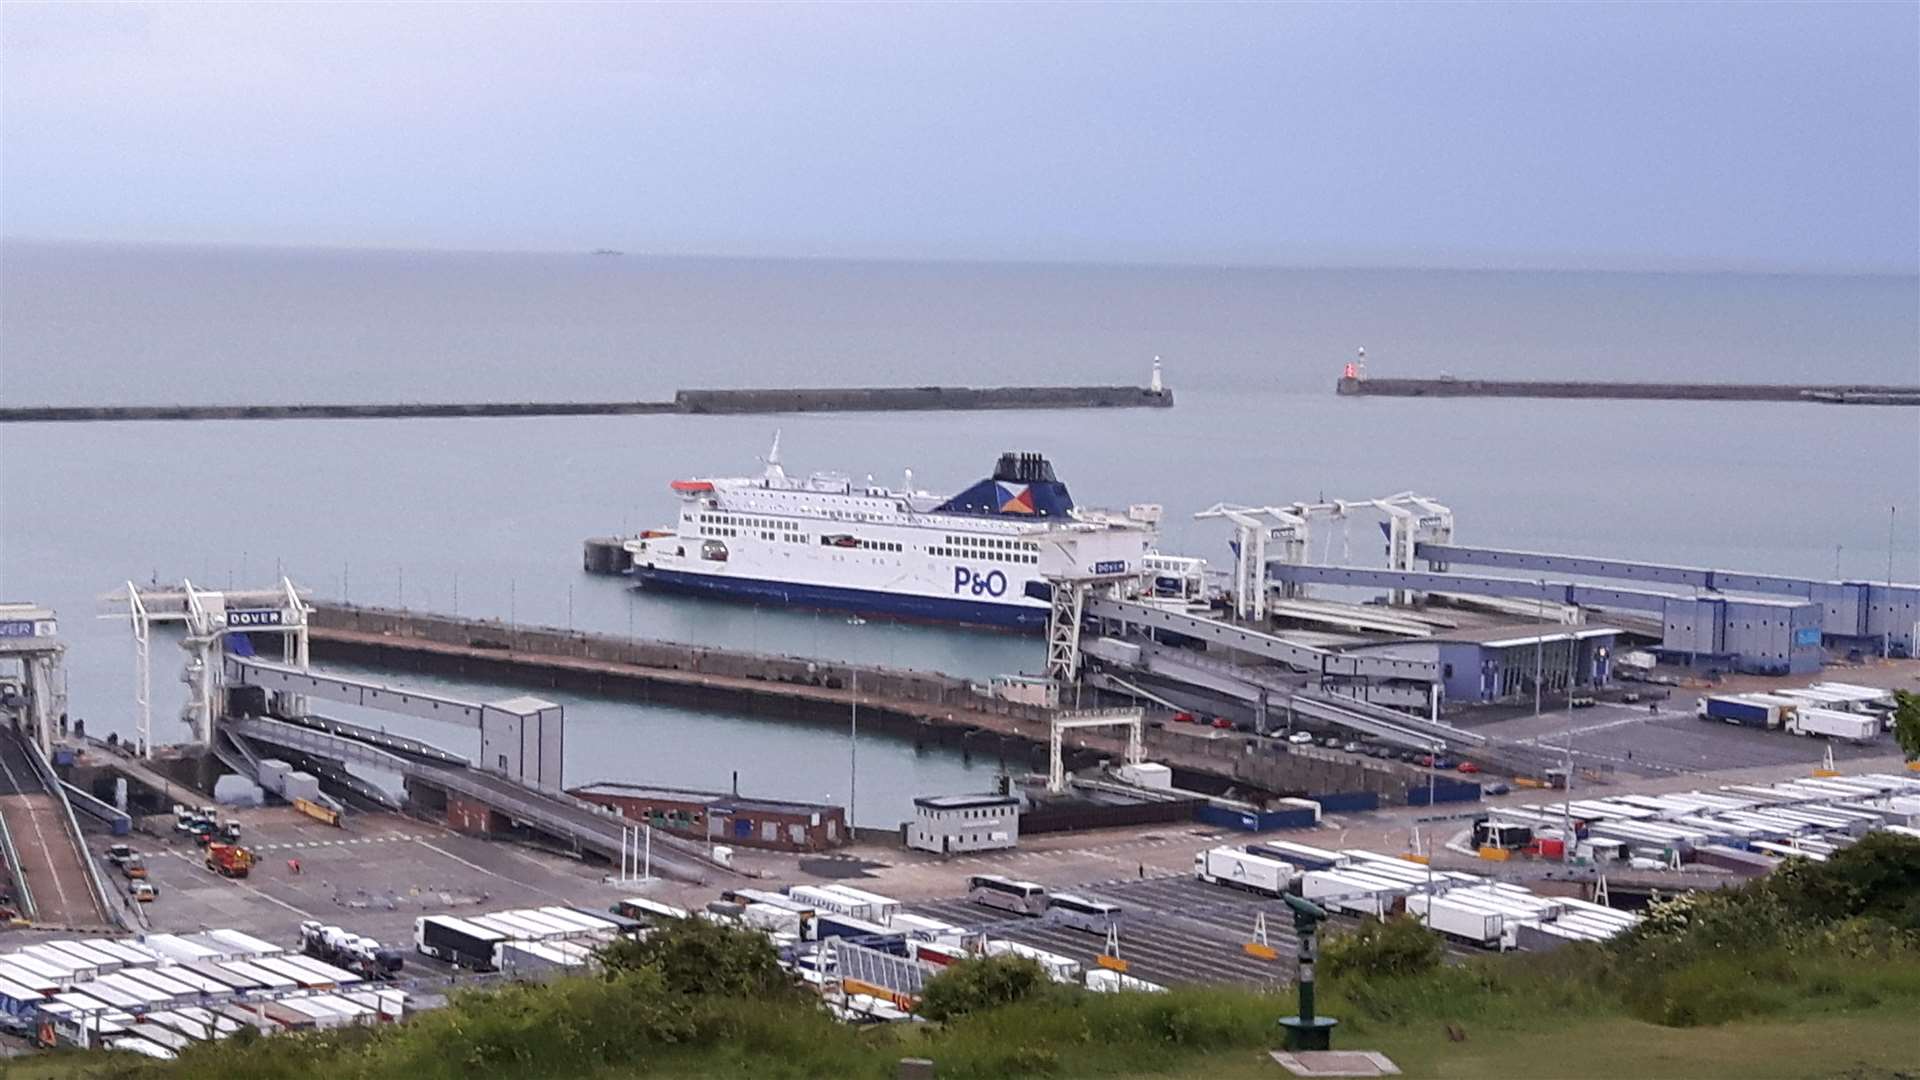 A P&O ferry at the Port of Dover